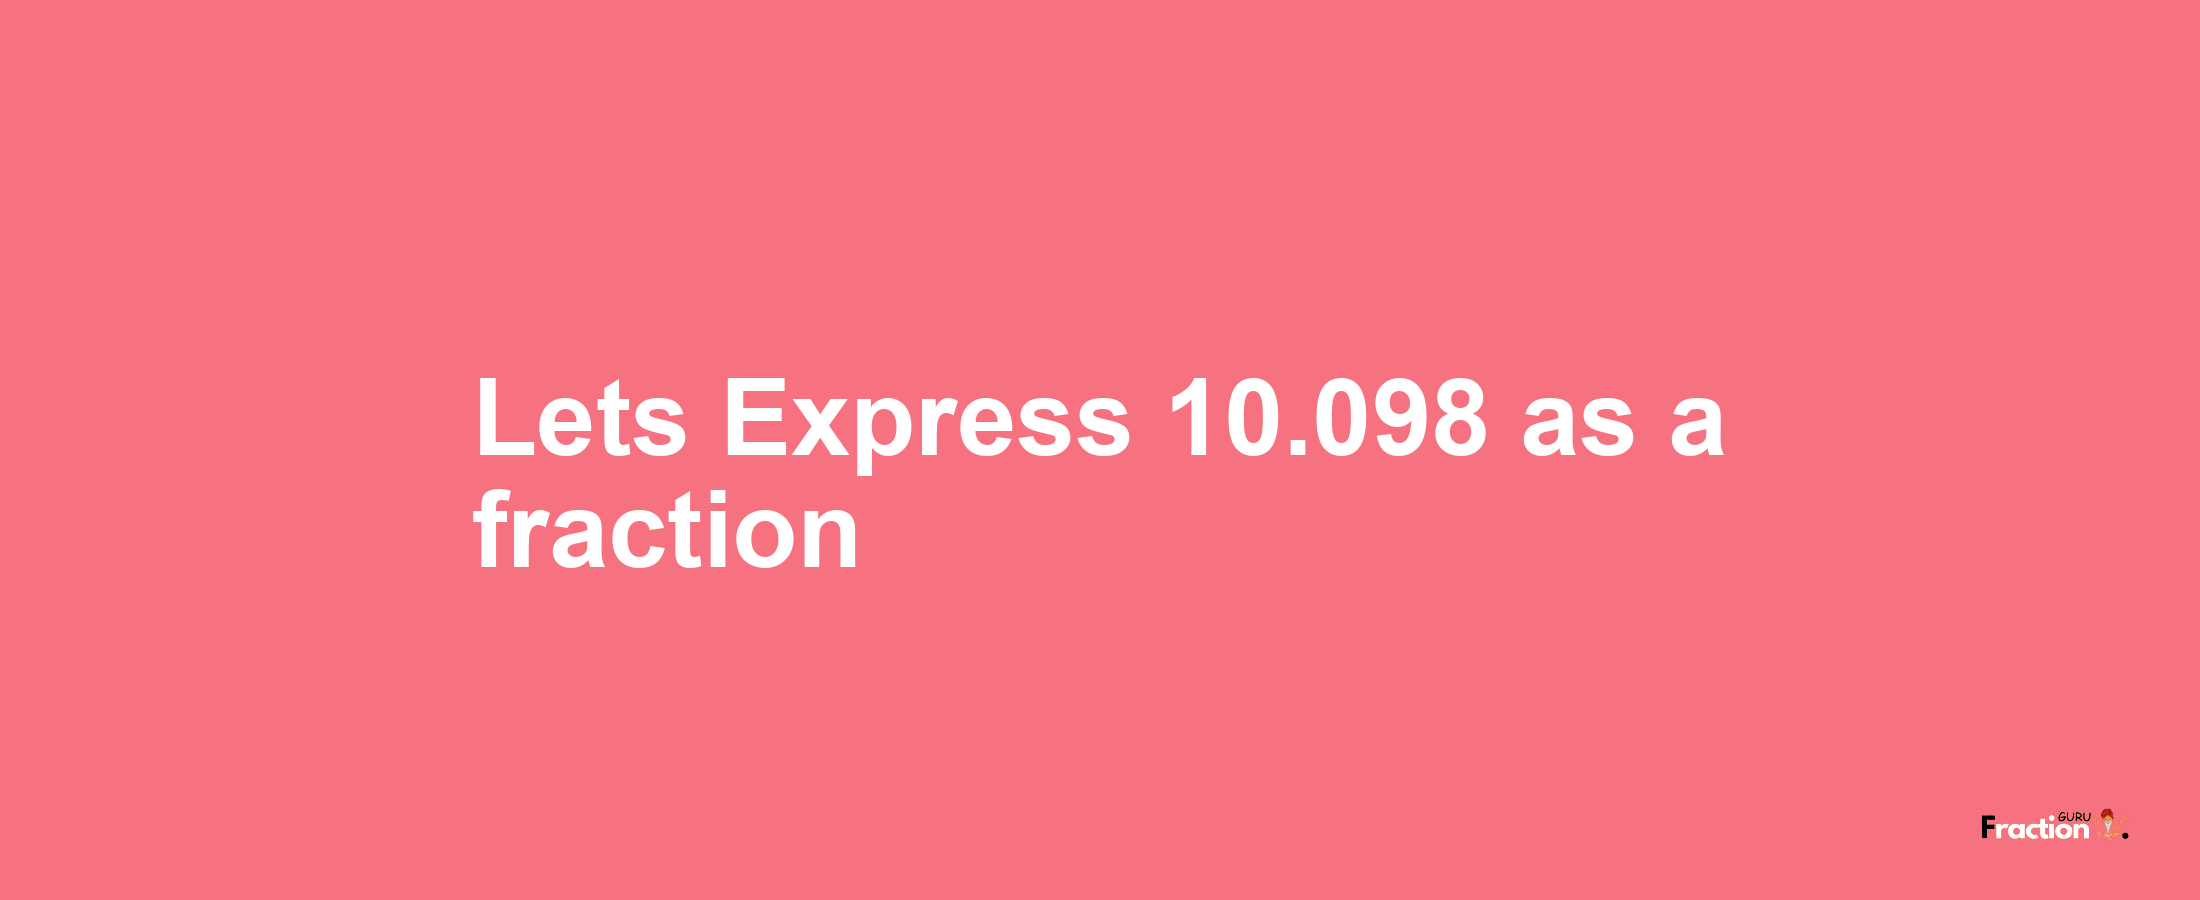 Lets Express 10.098 as afraction